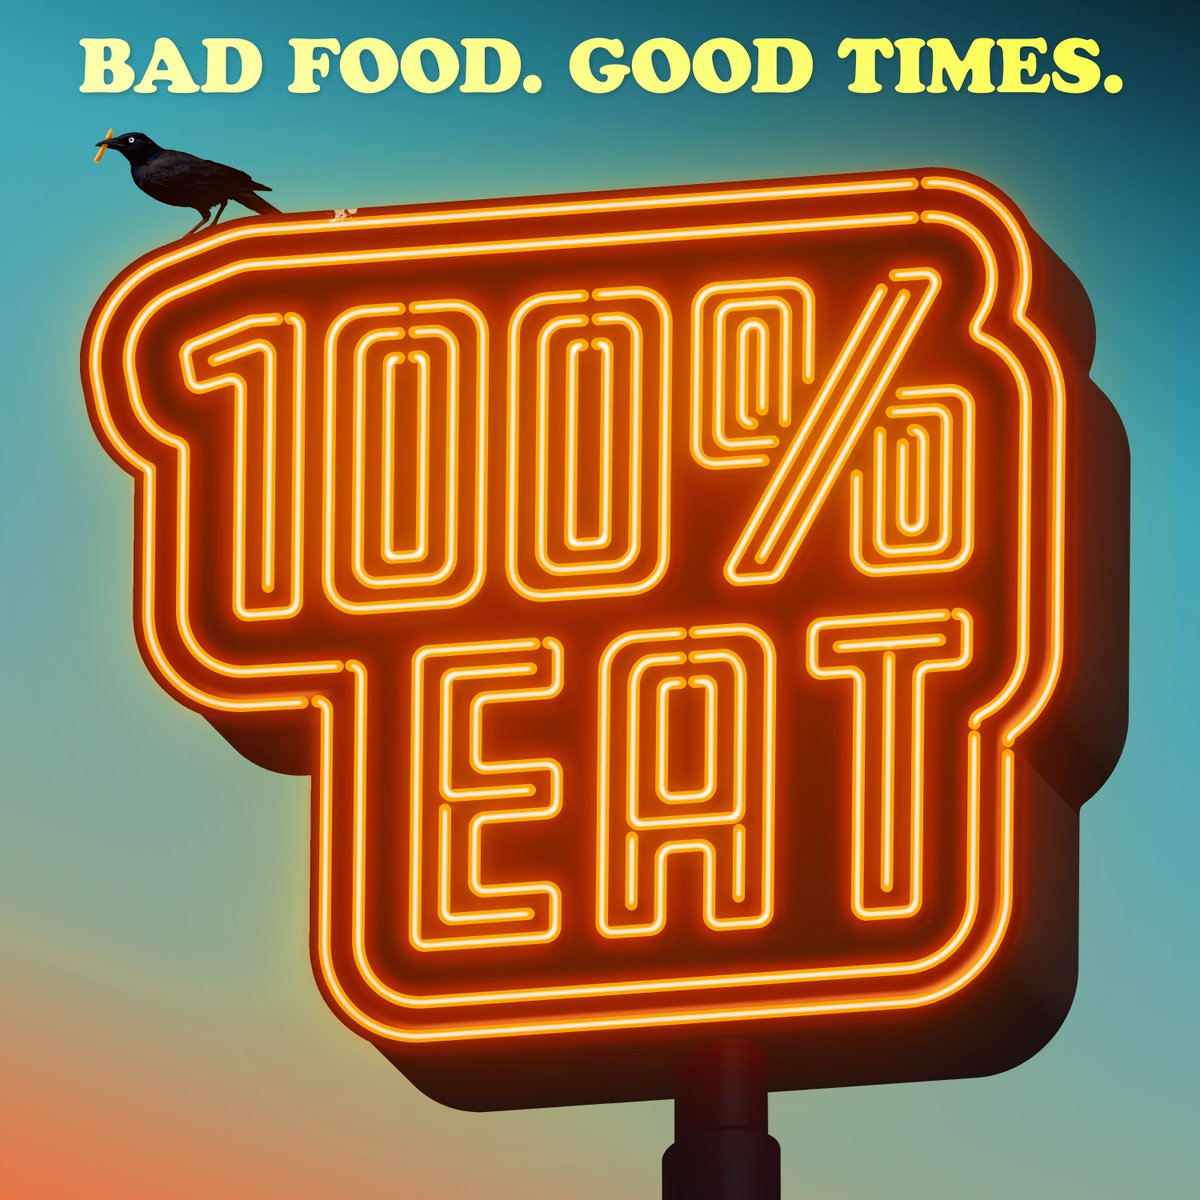 Our Heroes are flying a new banner: 100% Eat.
New episodes every Tuesday. Follow here for more information and BIG NEWS THIS SATURDAY. Are you 100% in?